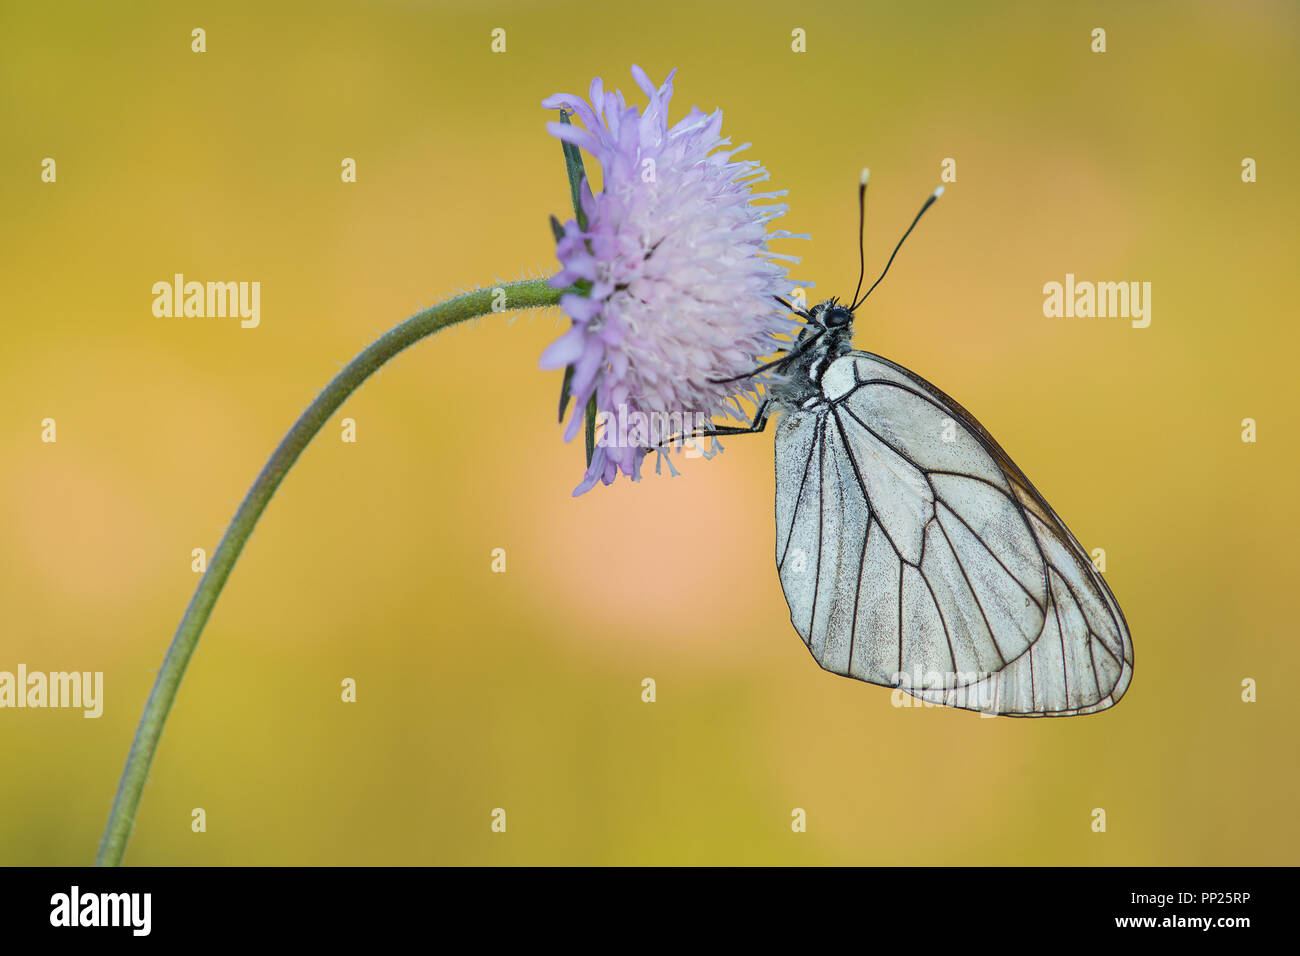 Black-veined white butterfly hanging on a flower on a natural background Stock Photo